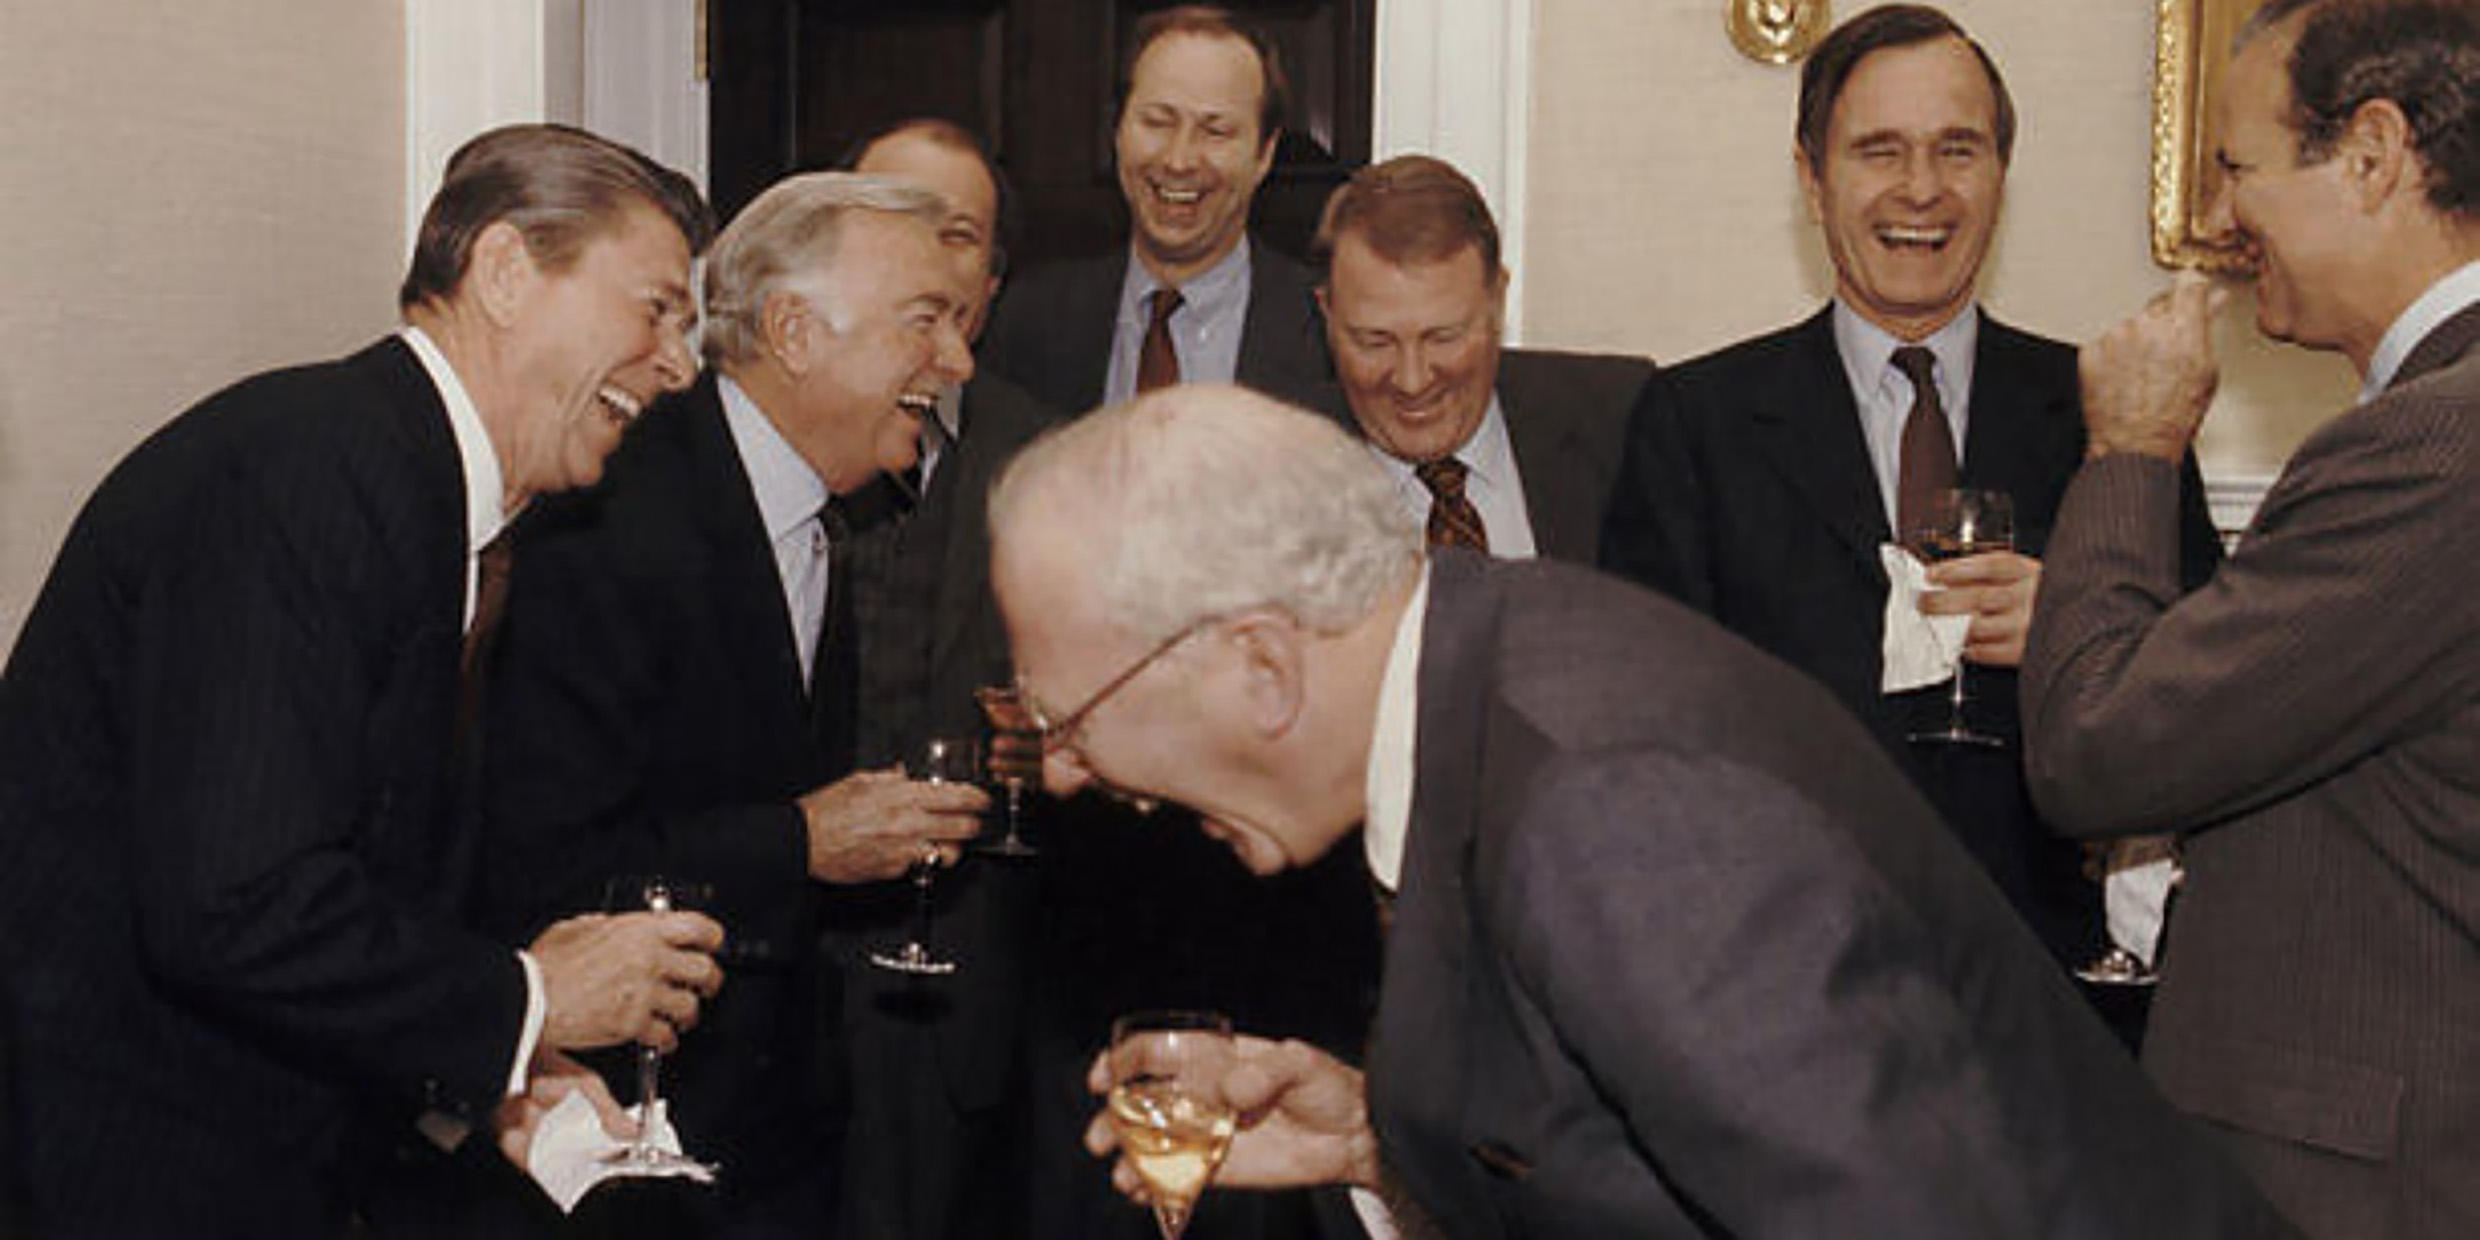 Image of group of laughing politicians